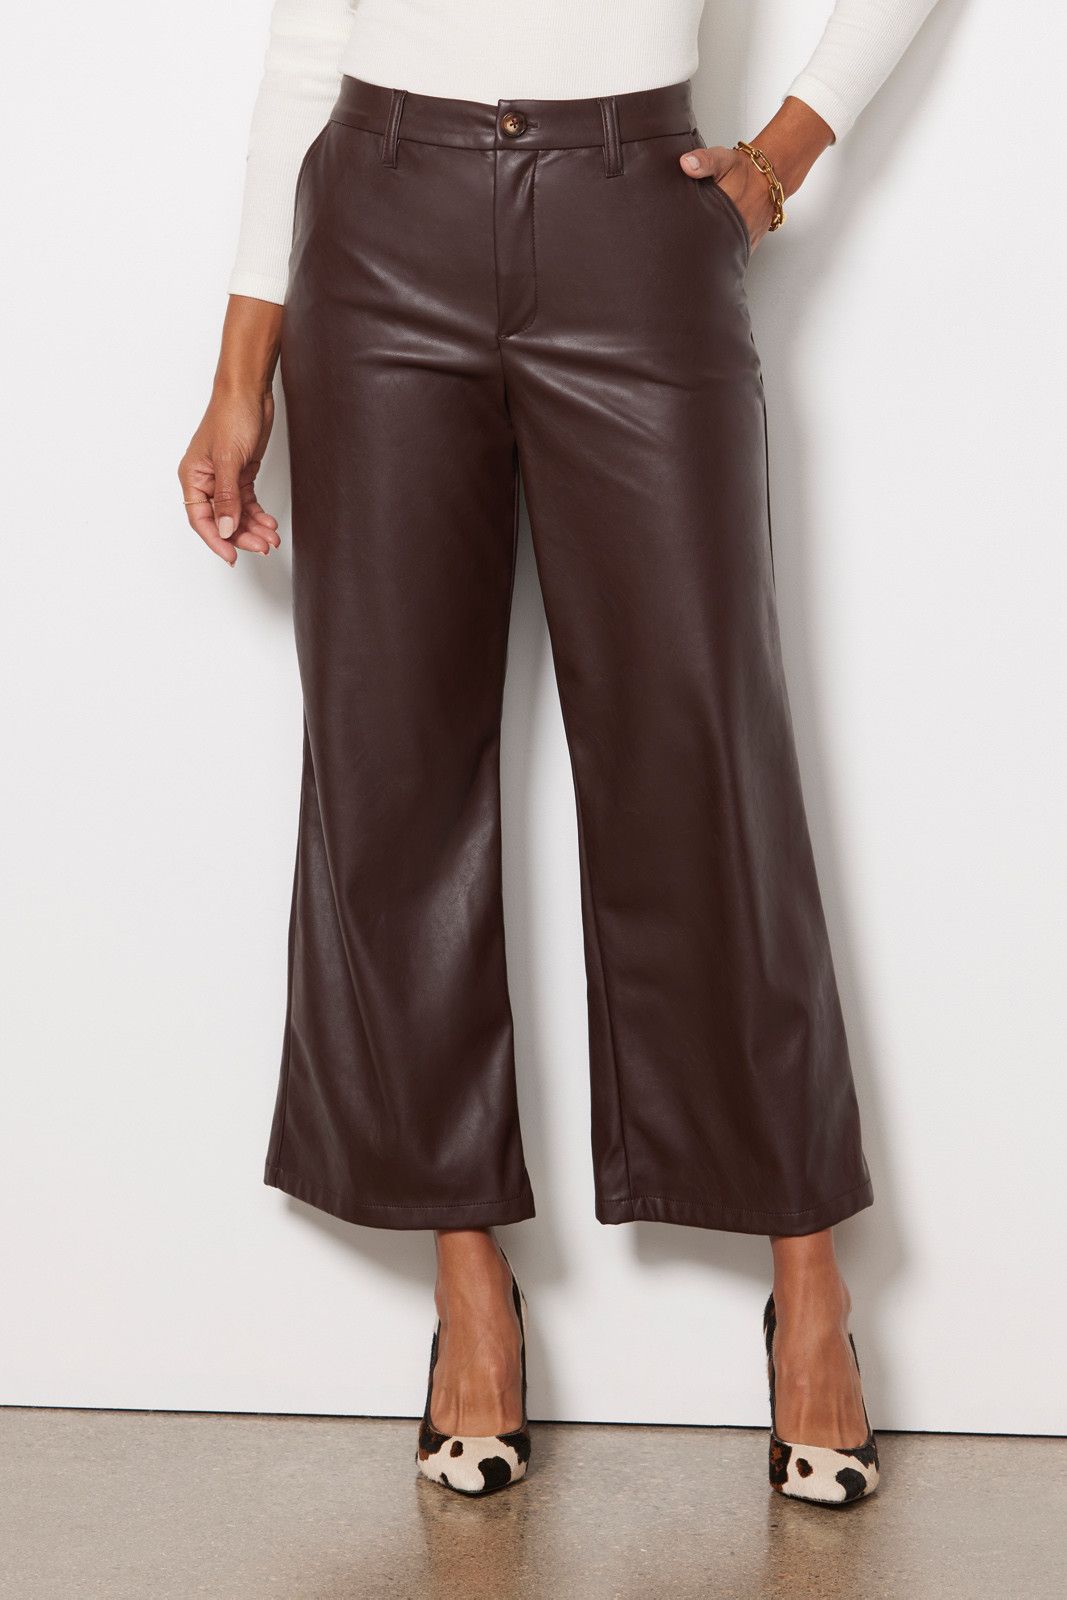 KUT FROM THE KLOTH Aubrielle Wide Leg Trouser | EVEREVE | Evereve